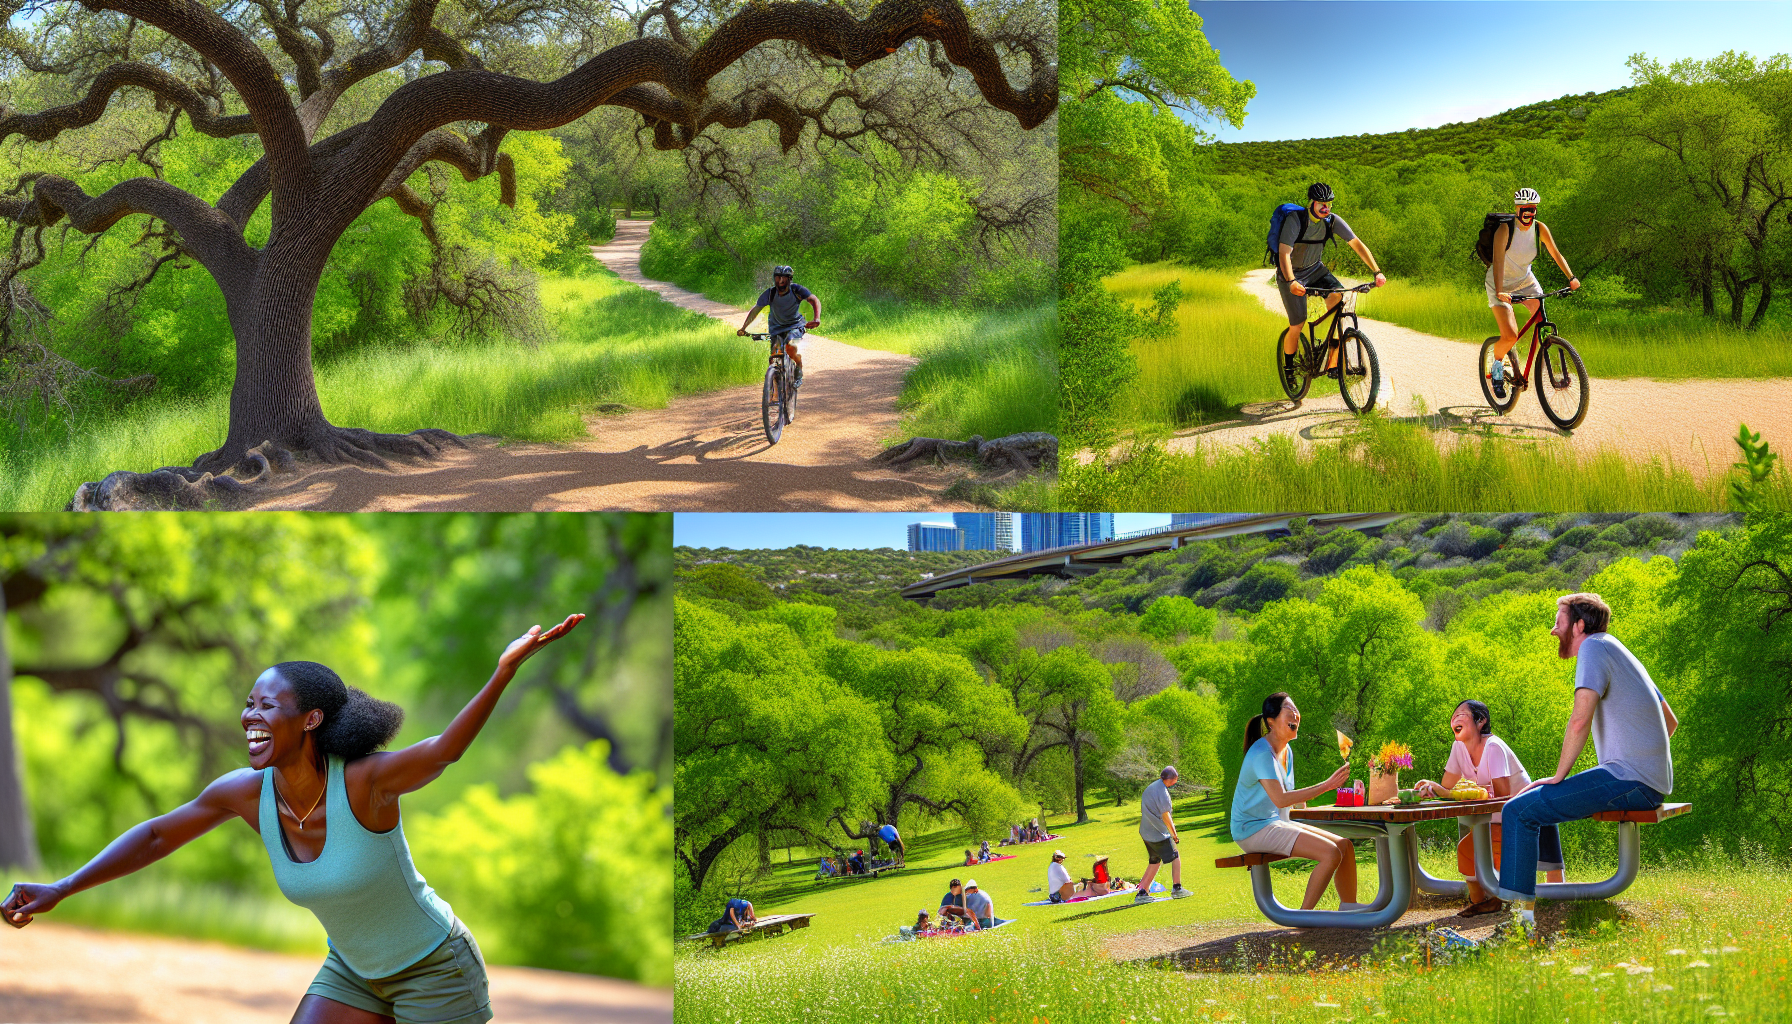 Group of people enjoying outdoor activities in a park. Active lifestyle in Austin TX.